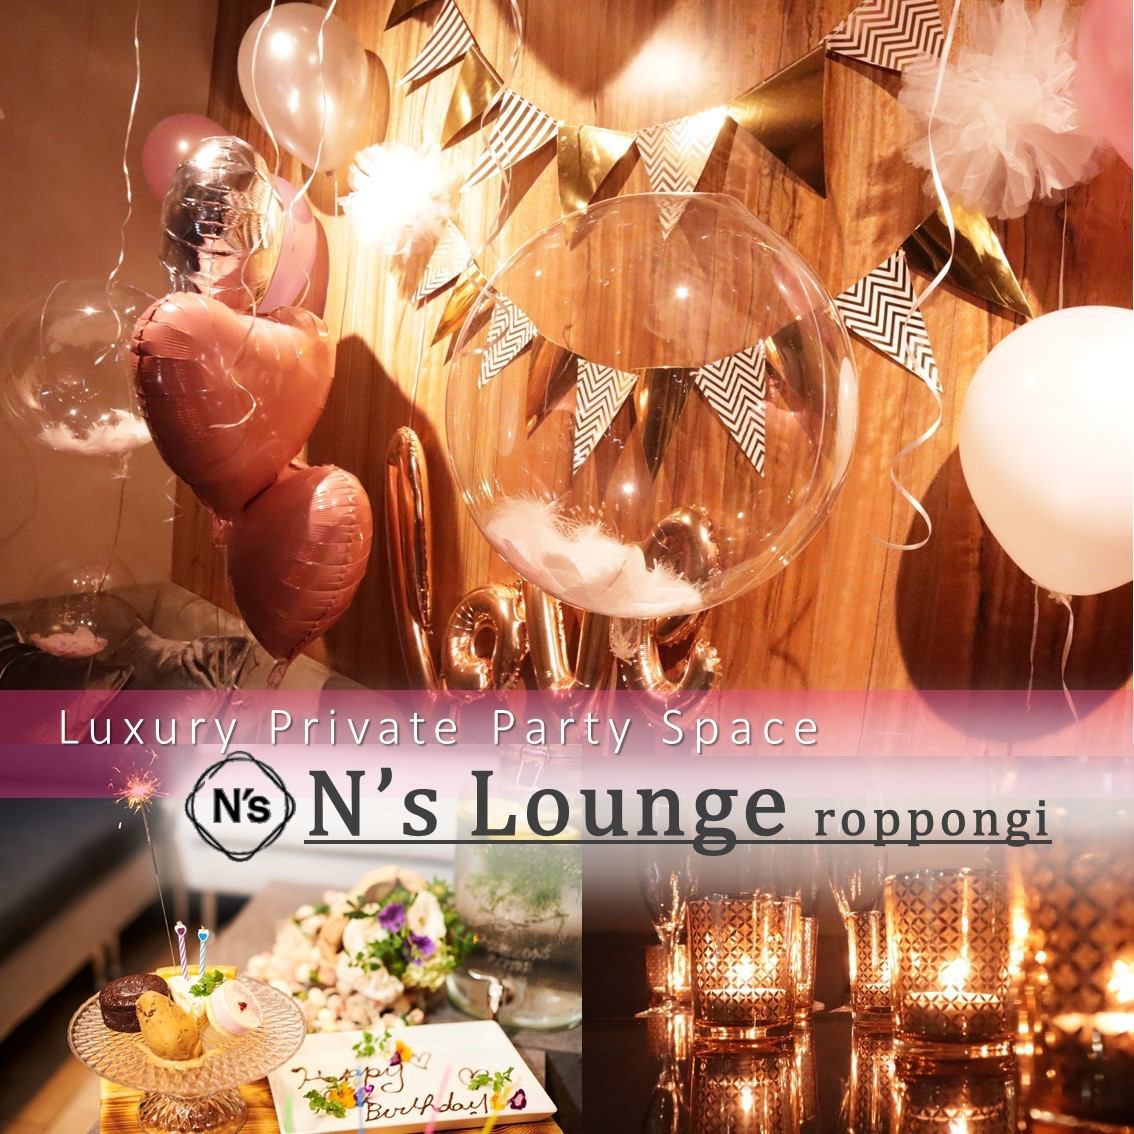 [High-quality party in a luxury private room-] Karaoke private room with balloon decoration PARTY ★